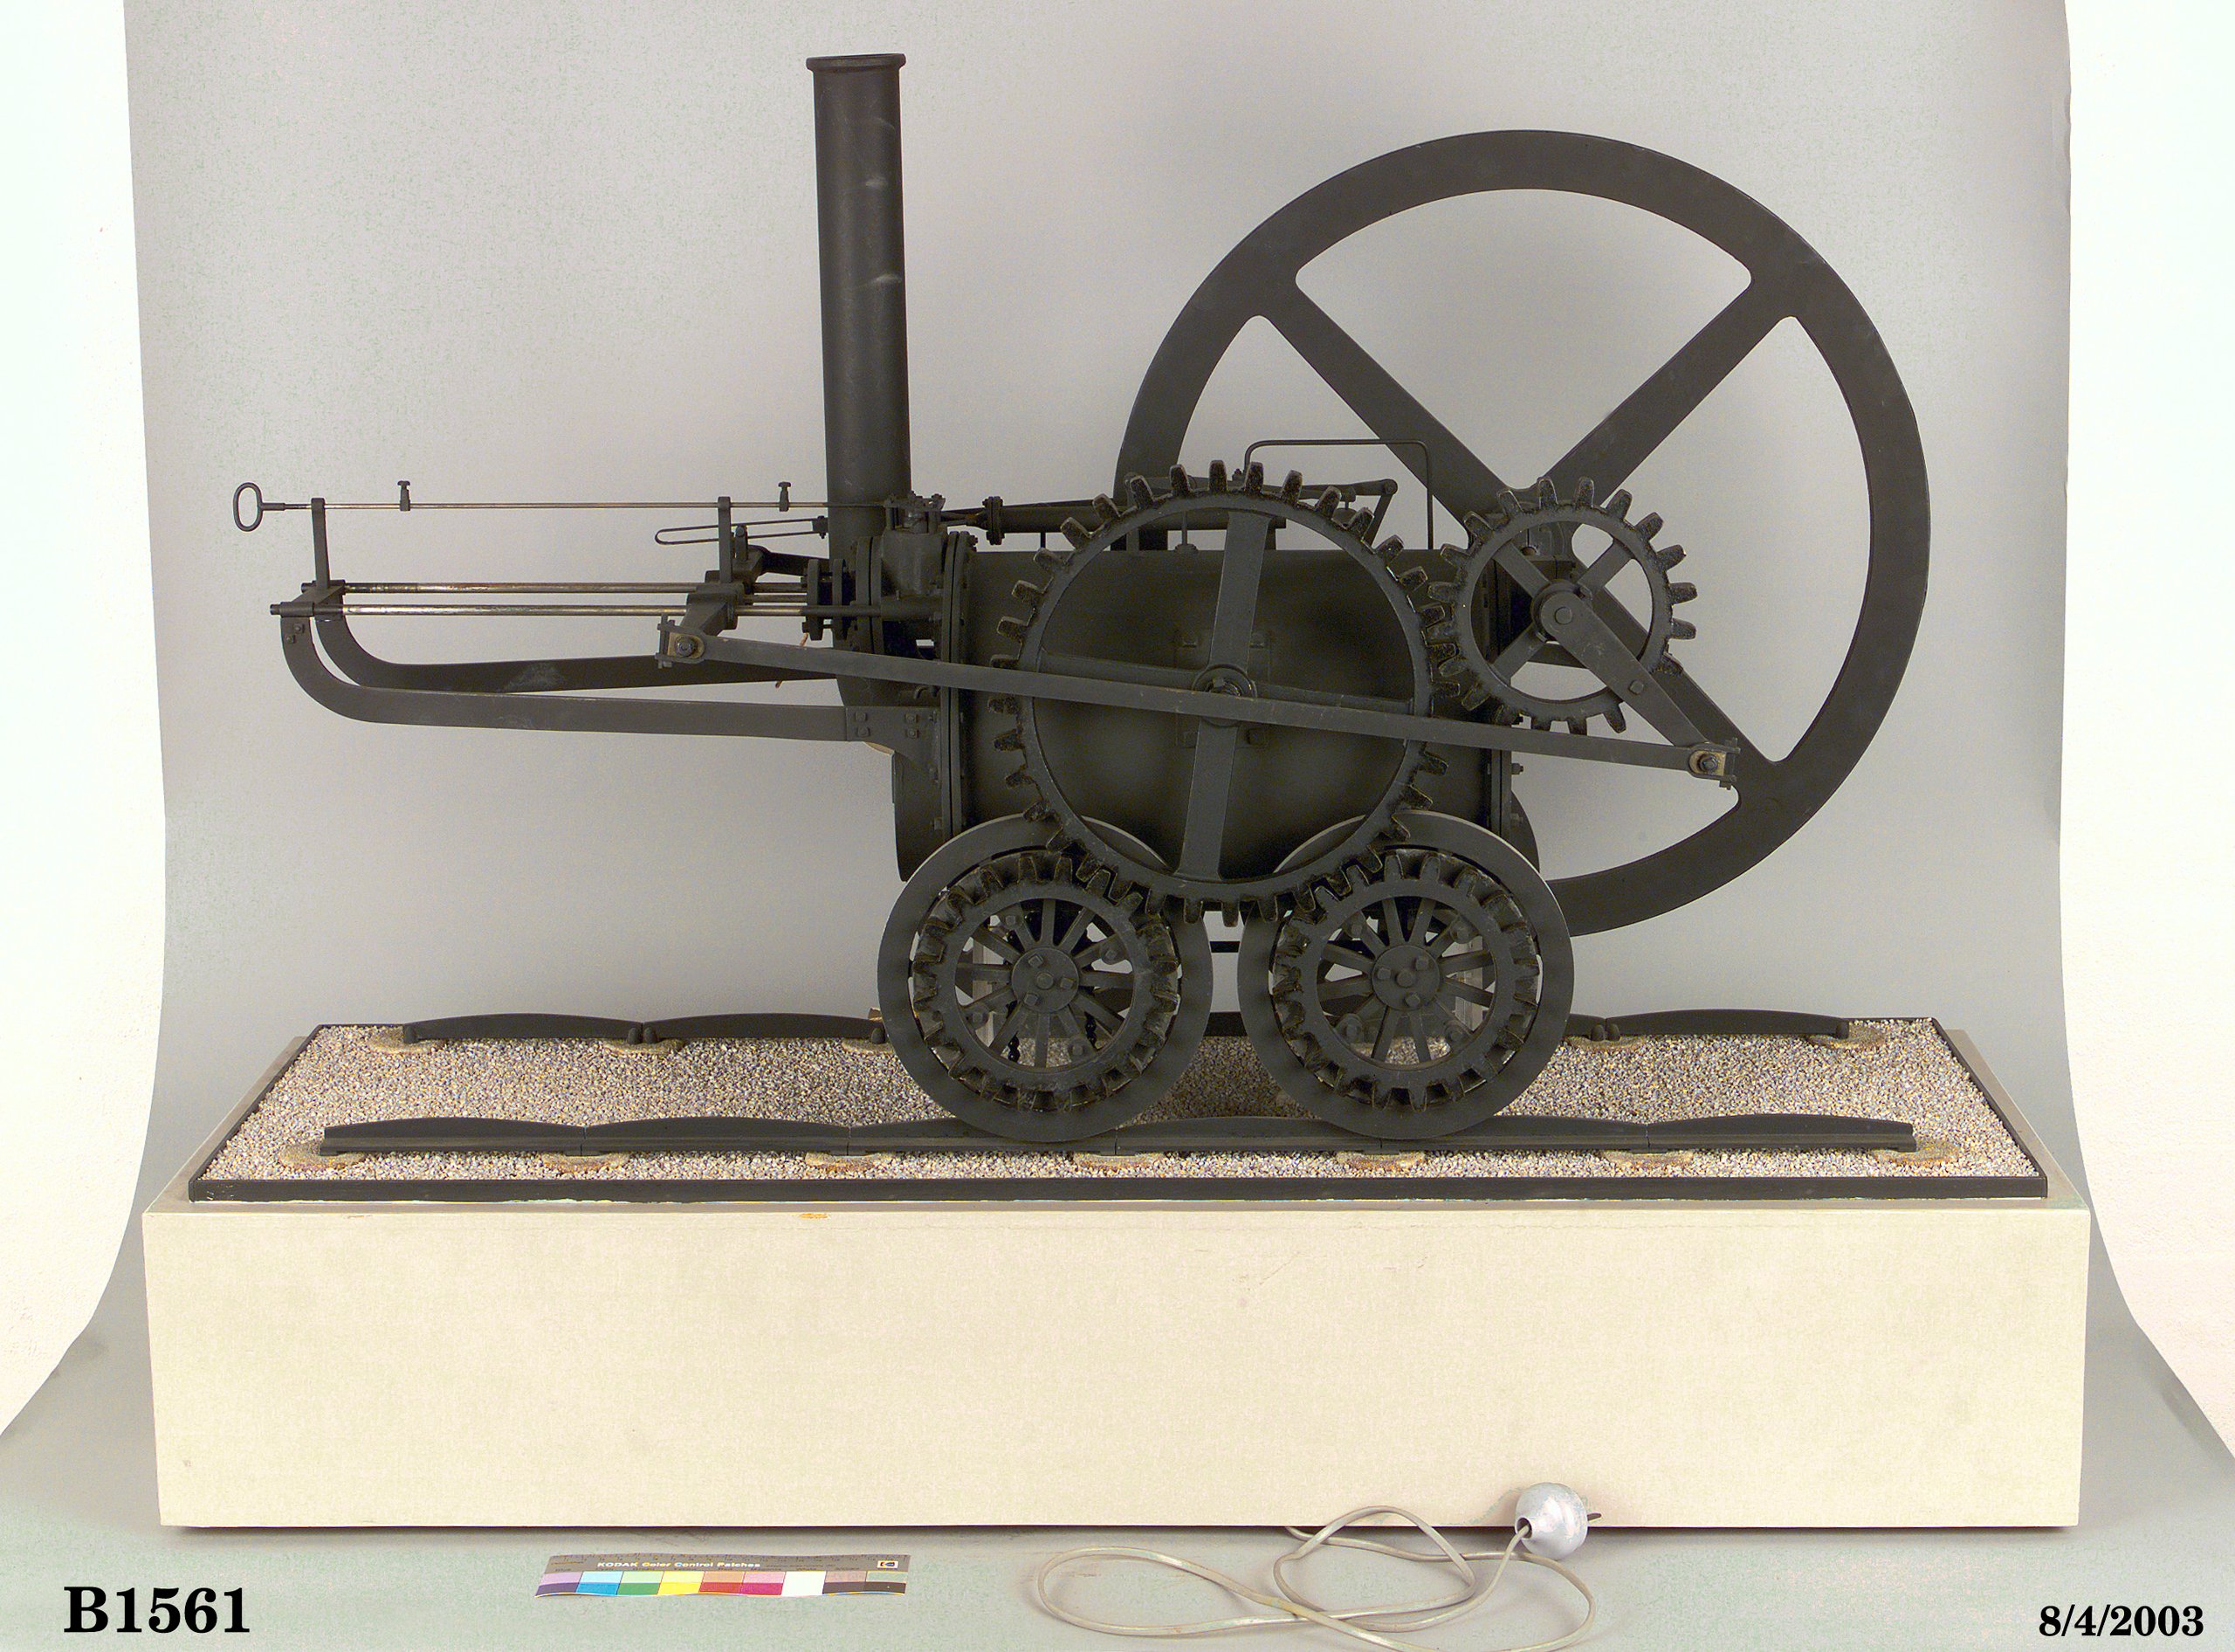 Model of Trevithick's 1804 tramway steam locomotive